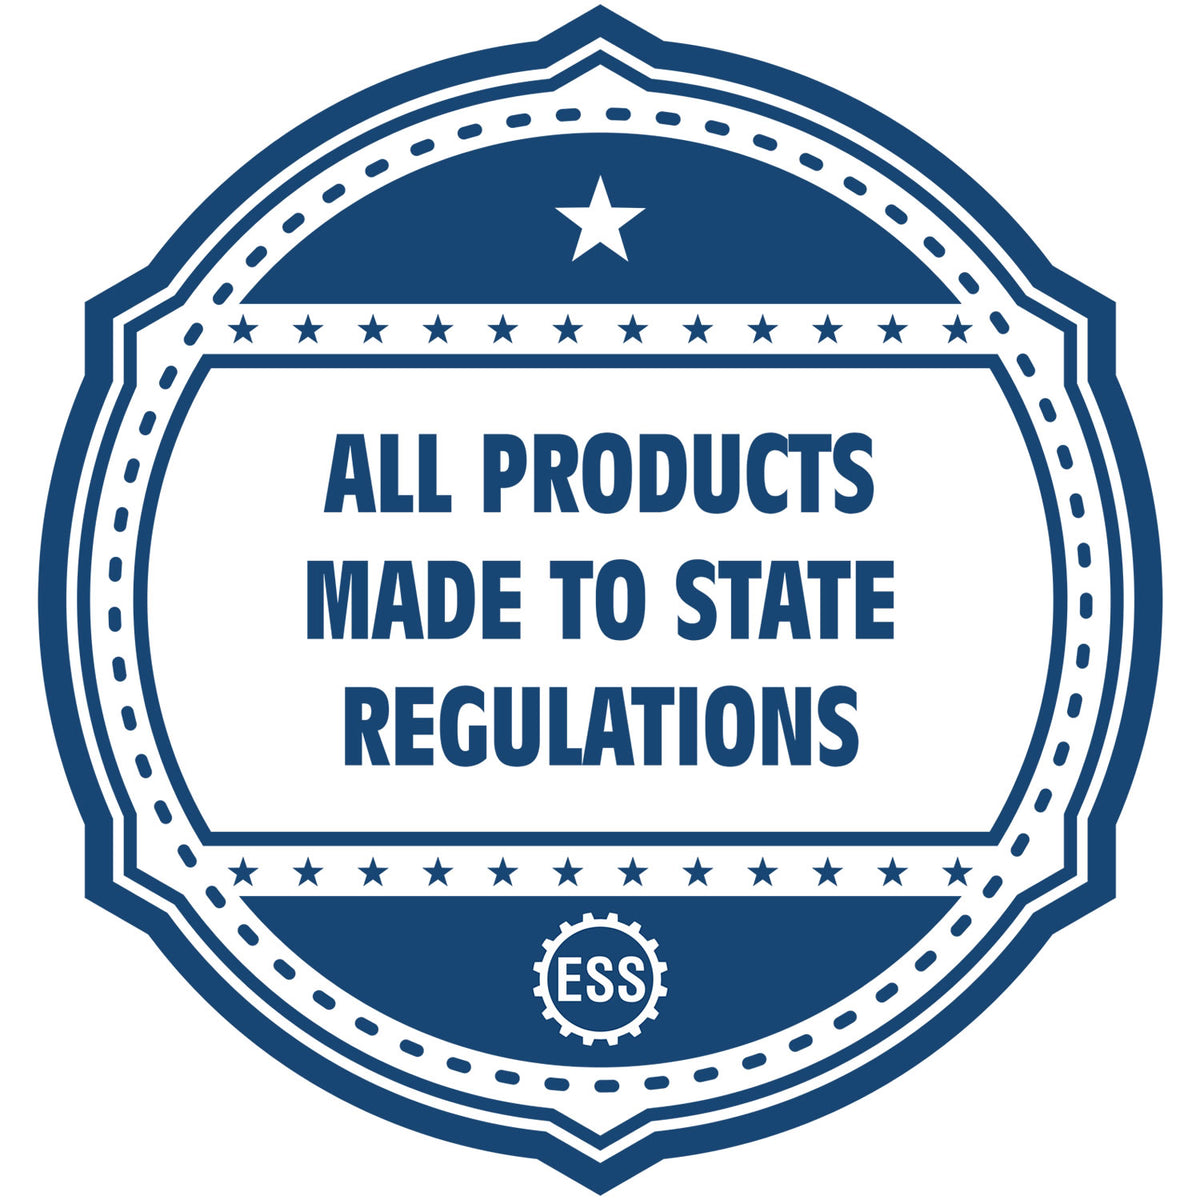 An icon or badge element for the Nevada Landscape Architectural Seal Stamp showing that this product is made in compliance with state regulations.